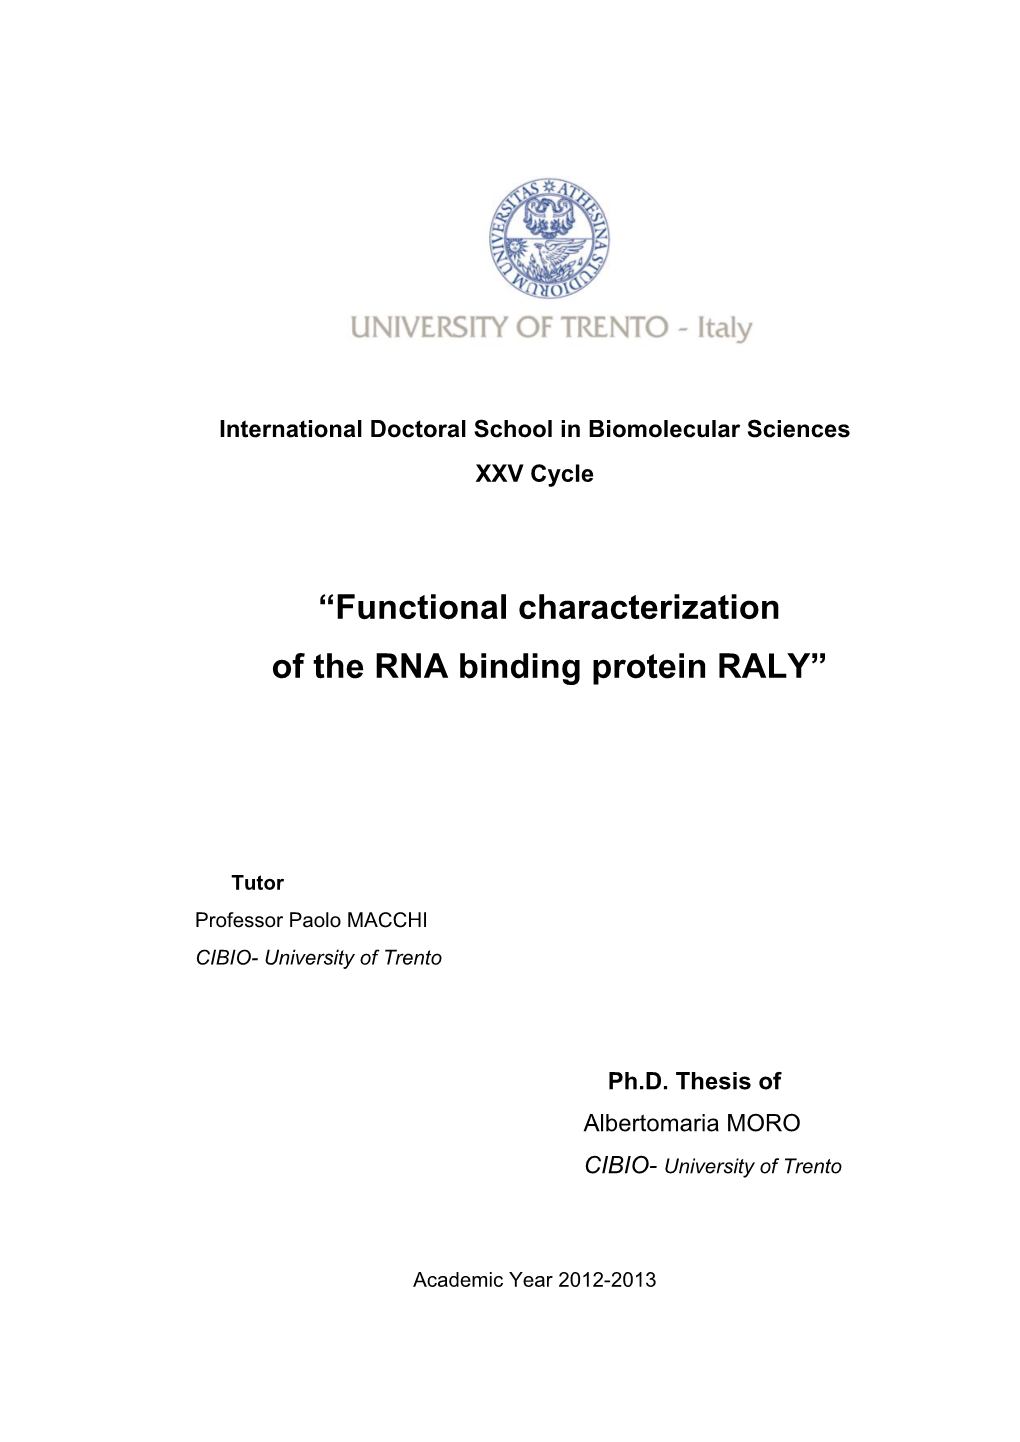 “Functional Characterization of the RNA Binding Protein RALY”